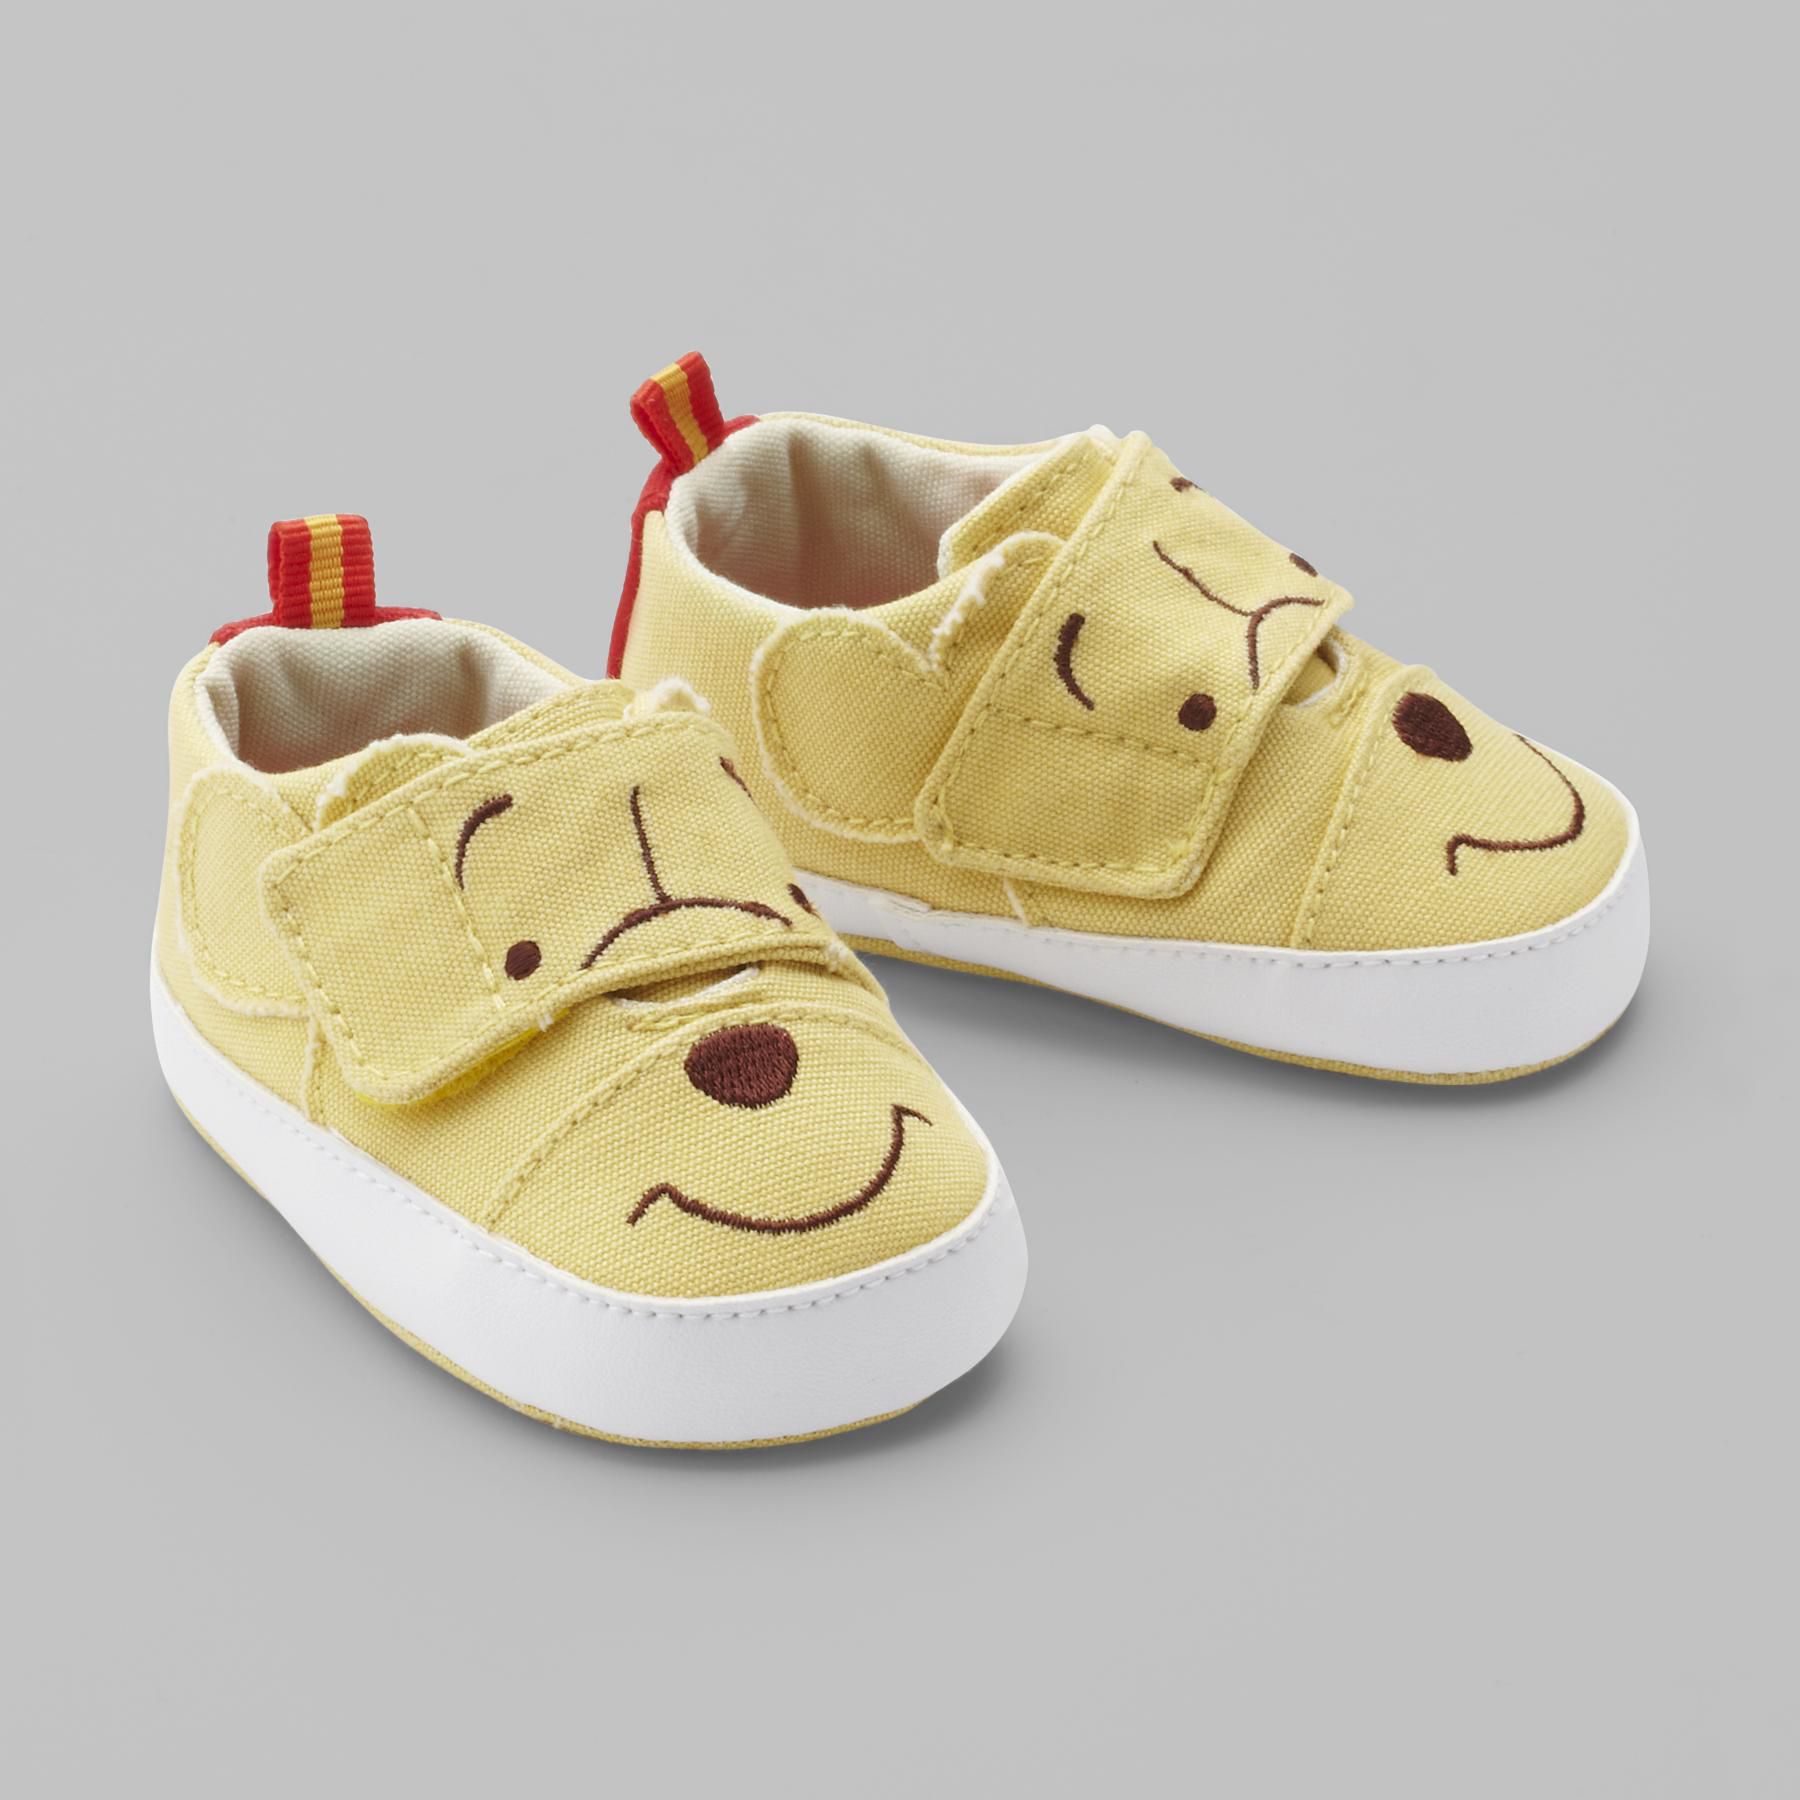 Disney Winnie the Pooh Infant's Canvas Sneakers